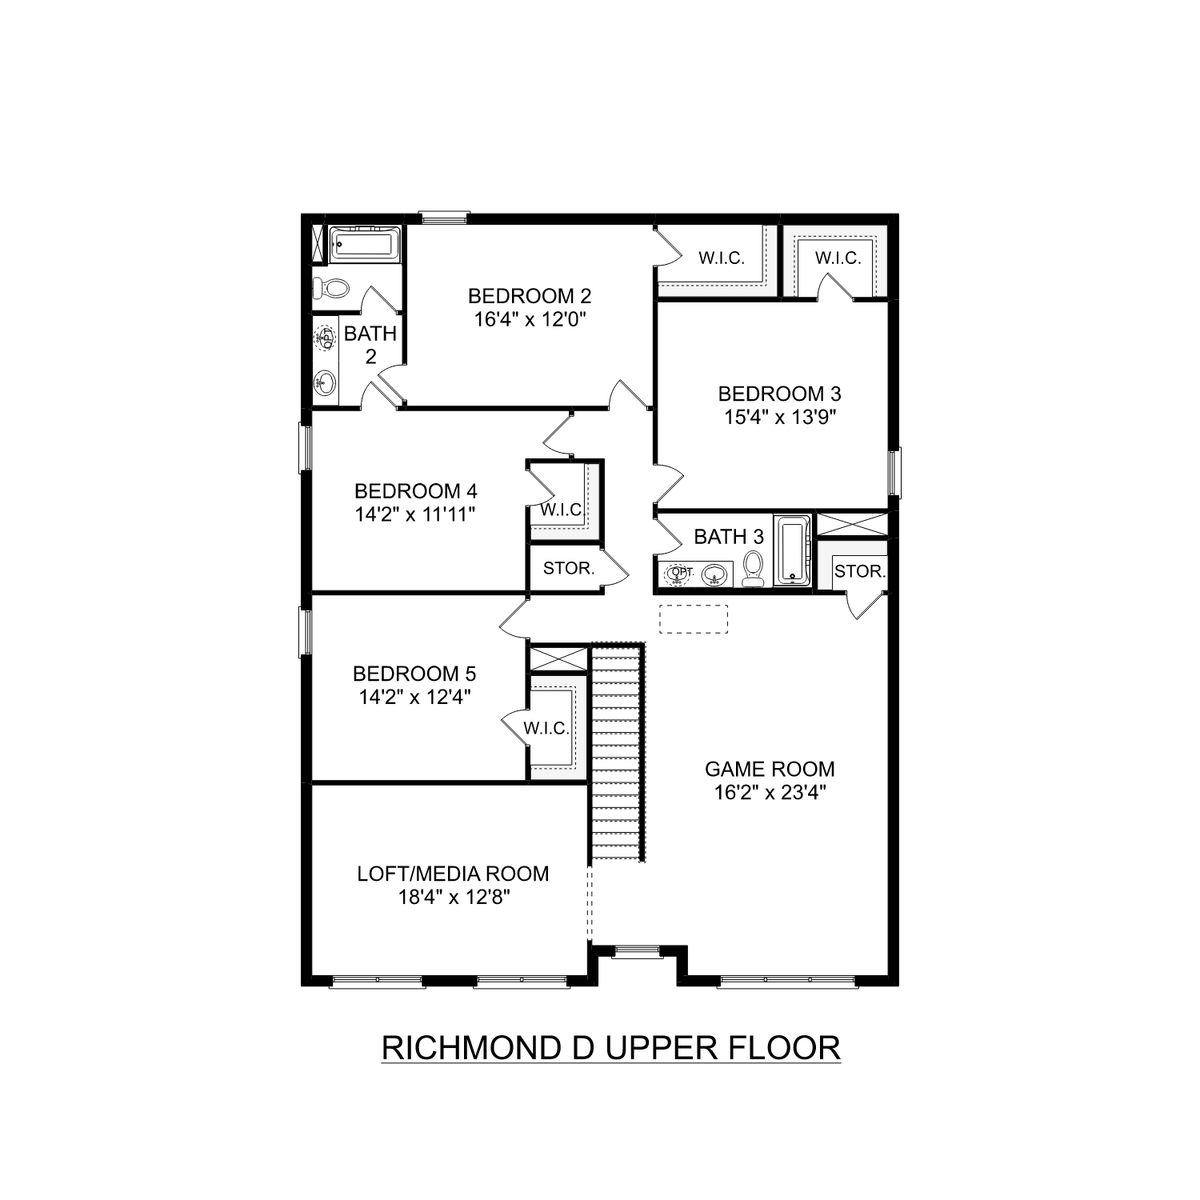 2 - The Richmond D floor plan layout for 2153 Dawson Lane in Davidson Homes' The Reserve at North Ridge community.